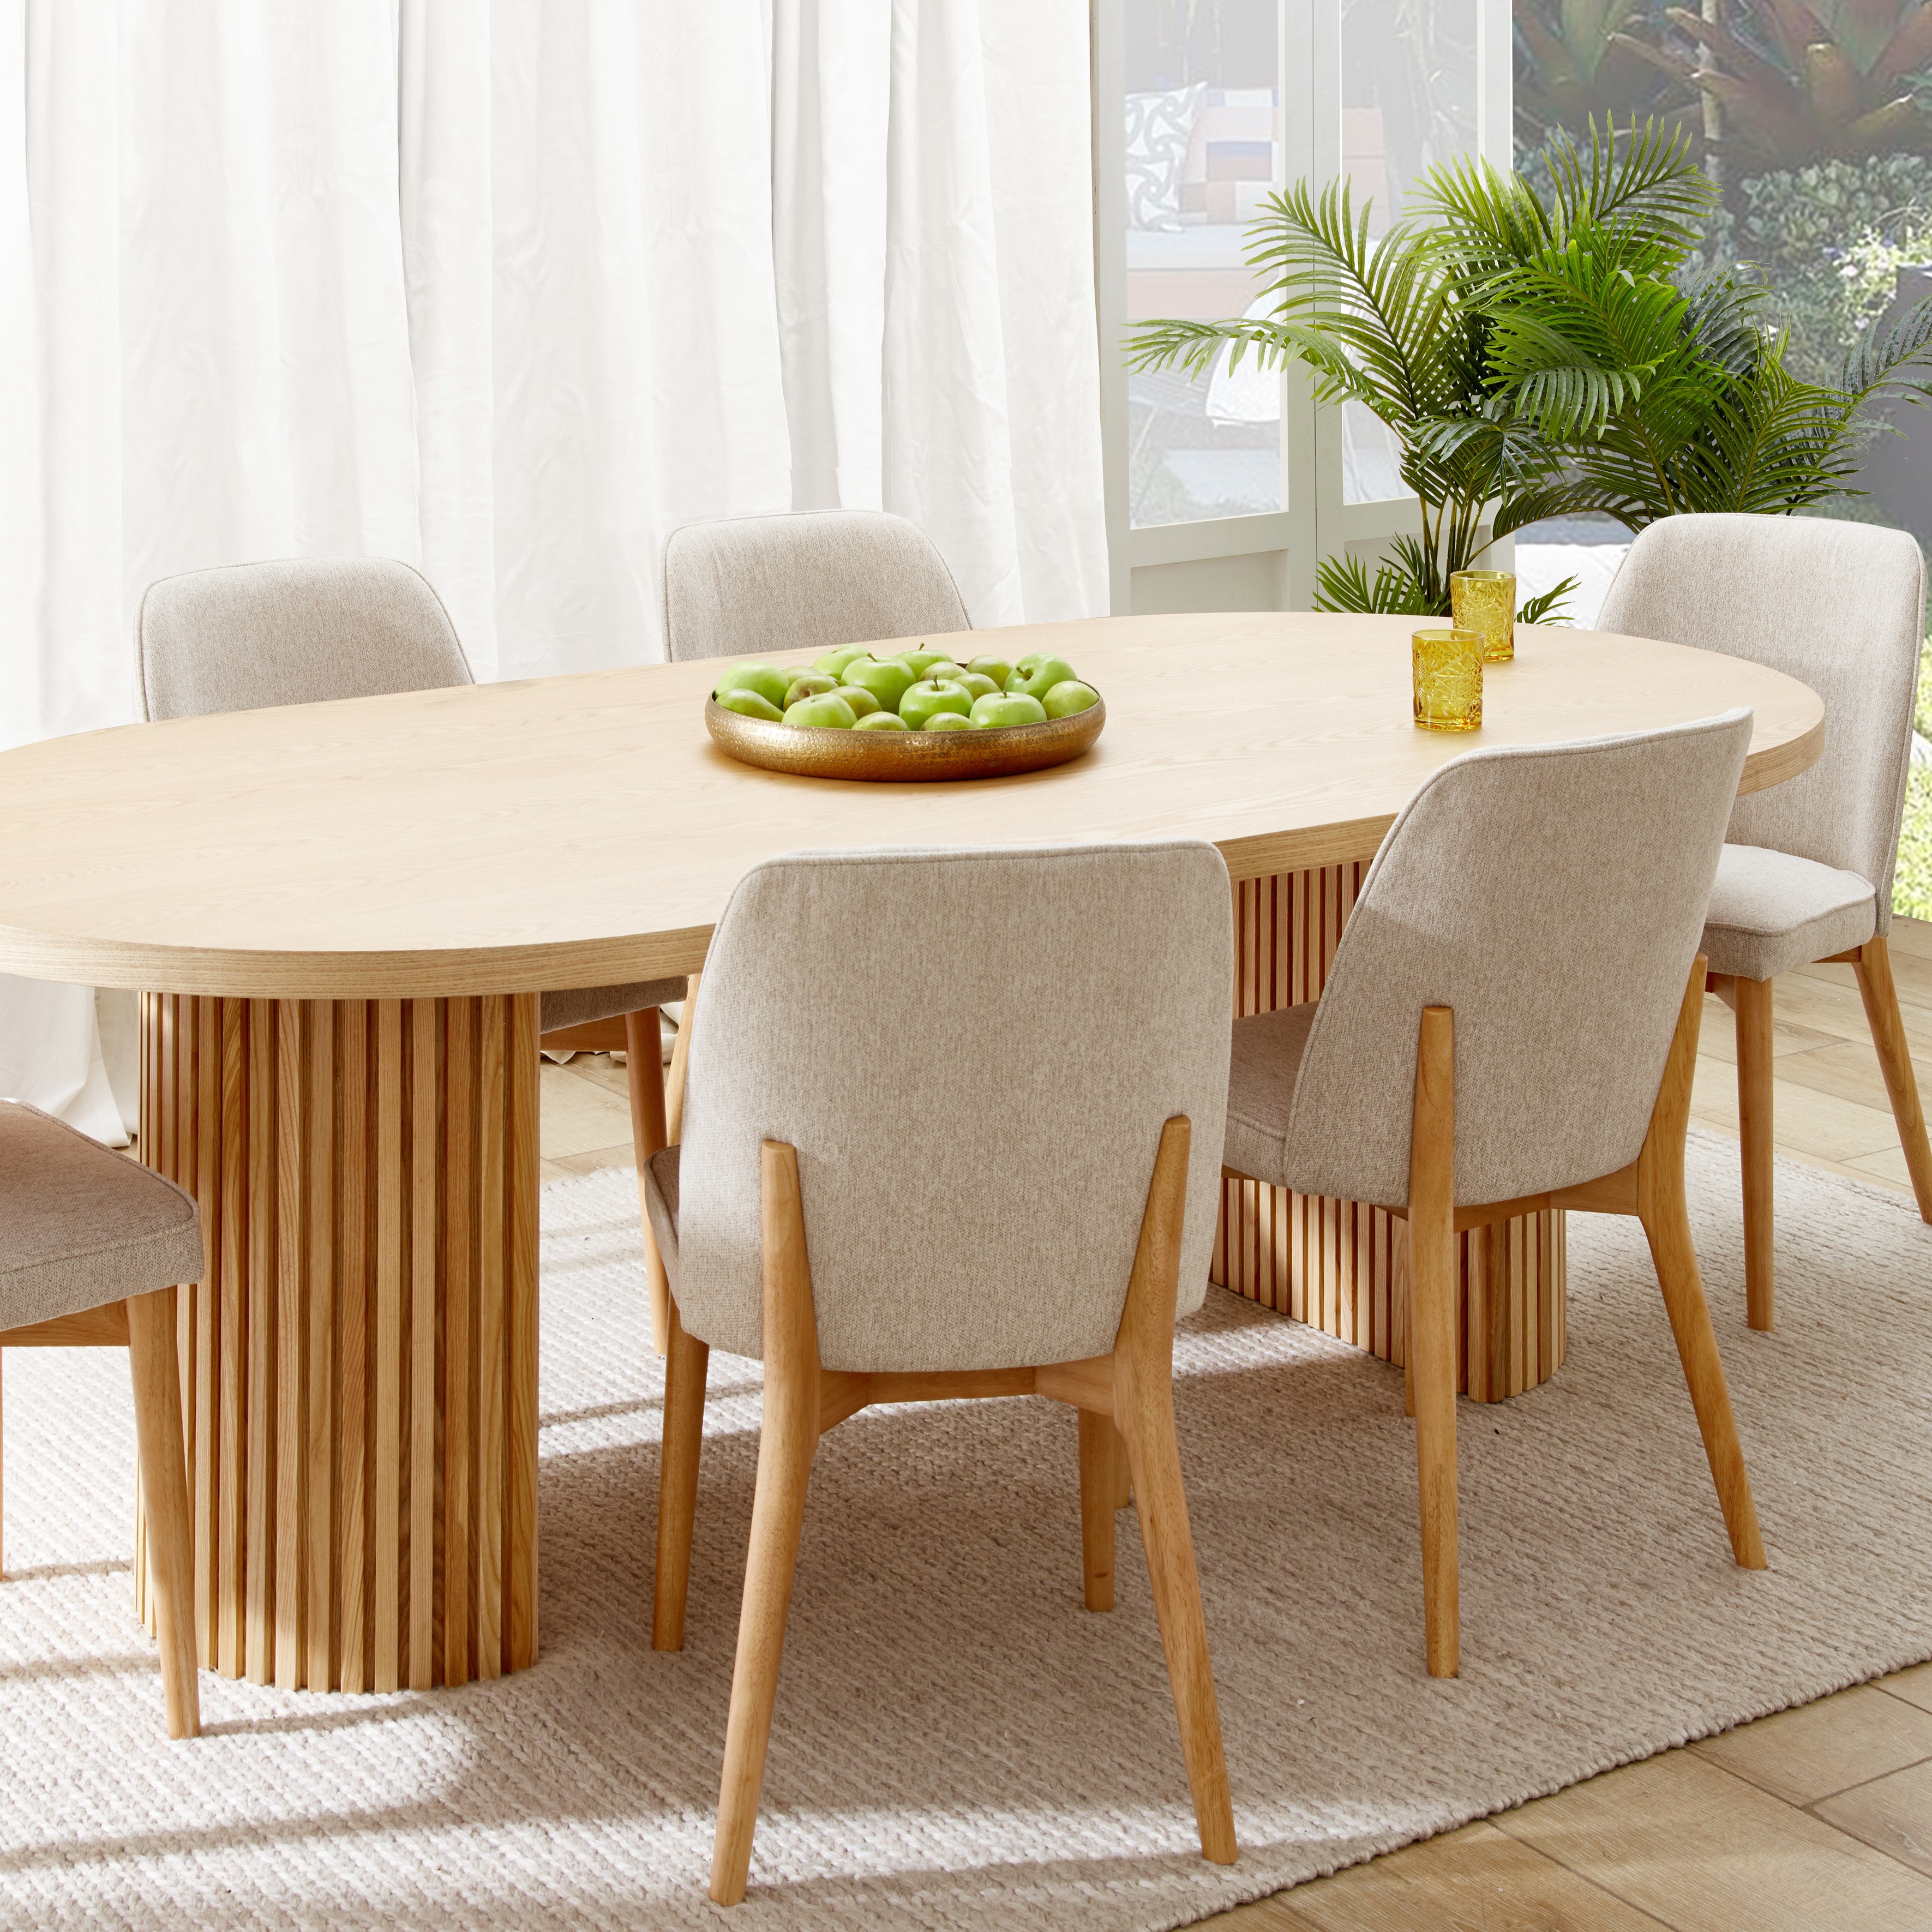 Eclipse natural dining suite with Paris chairs